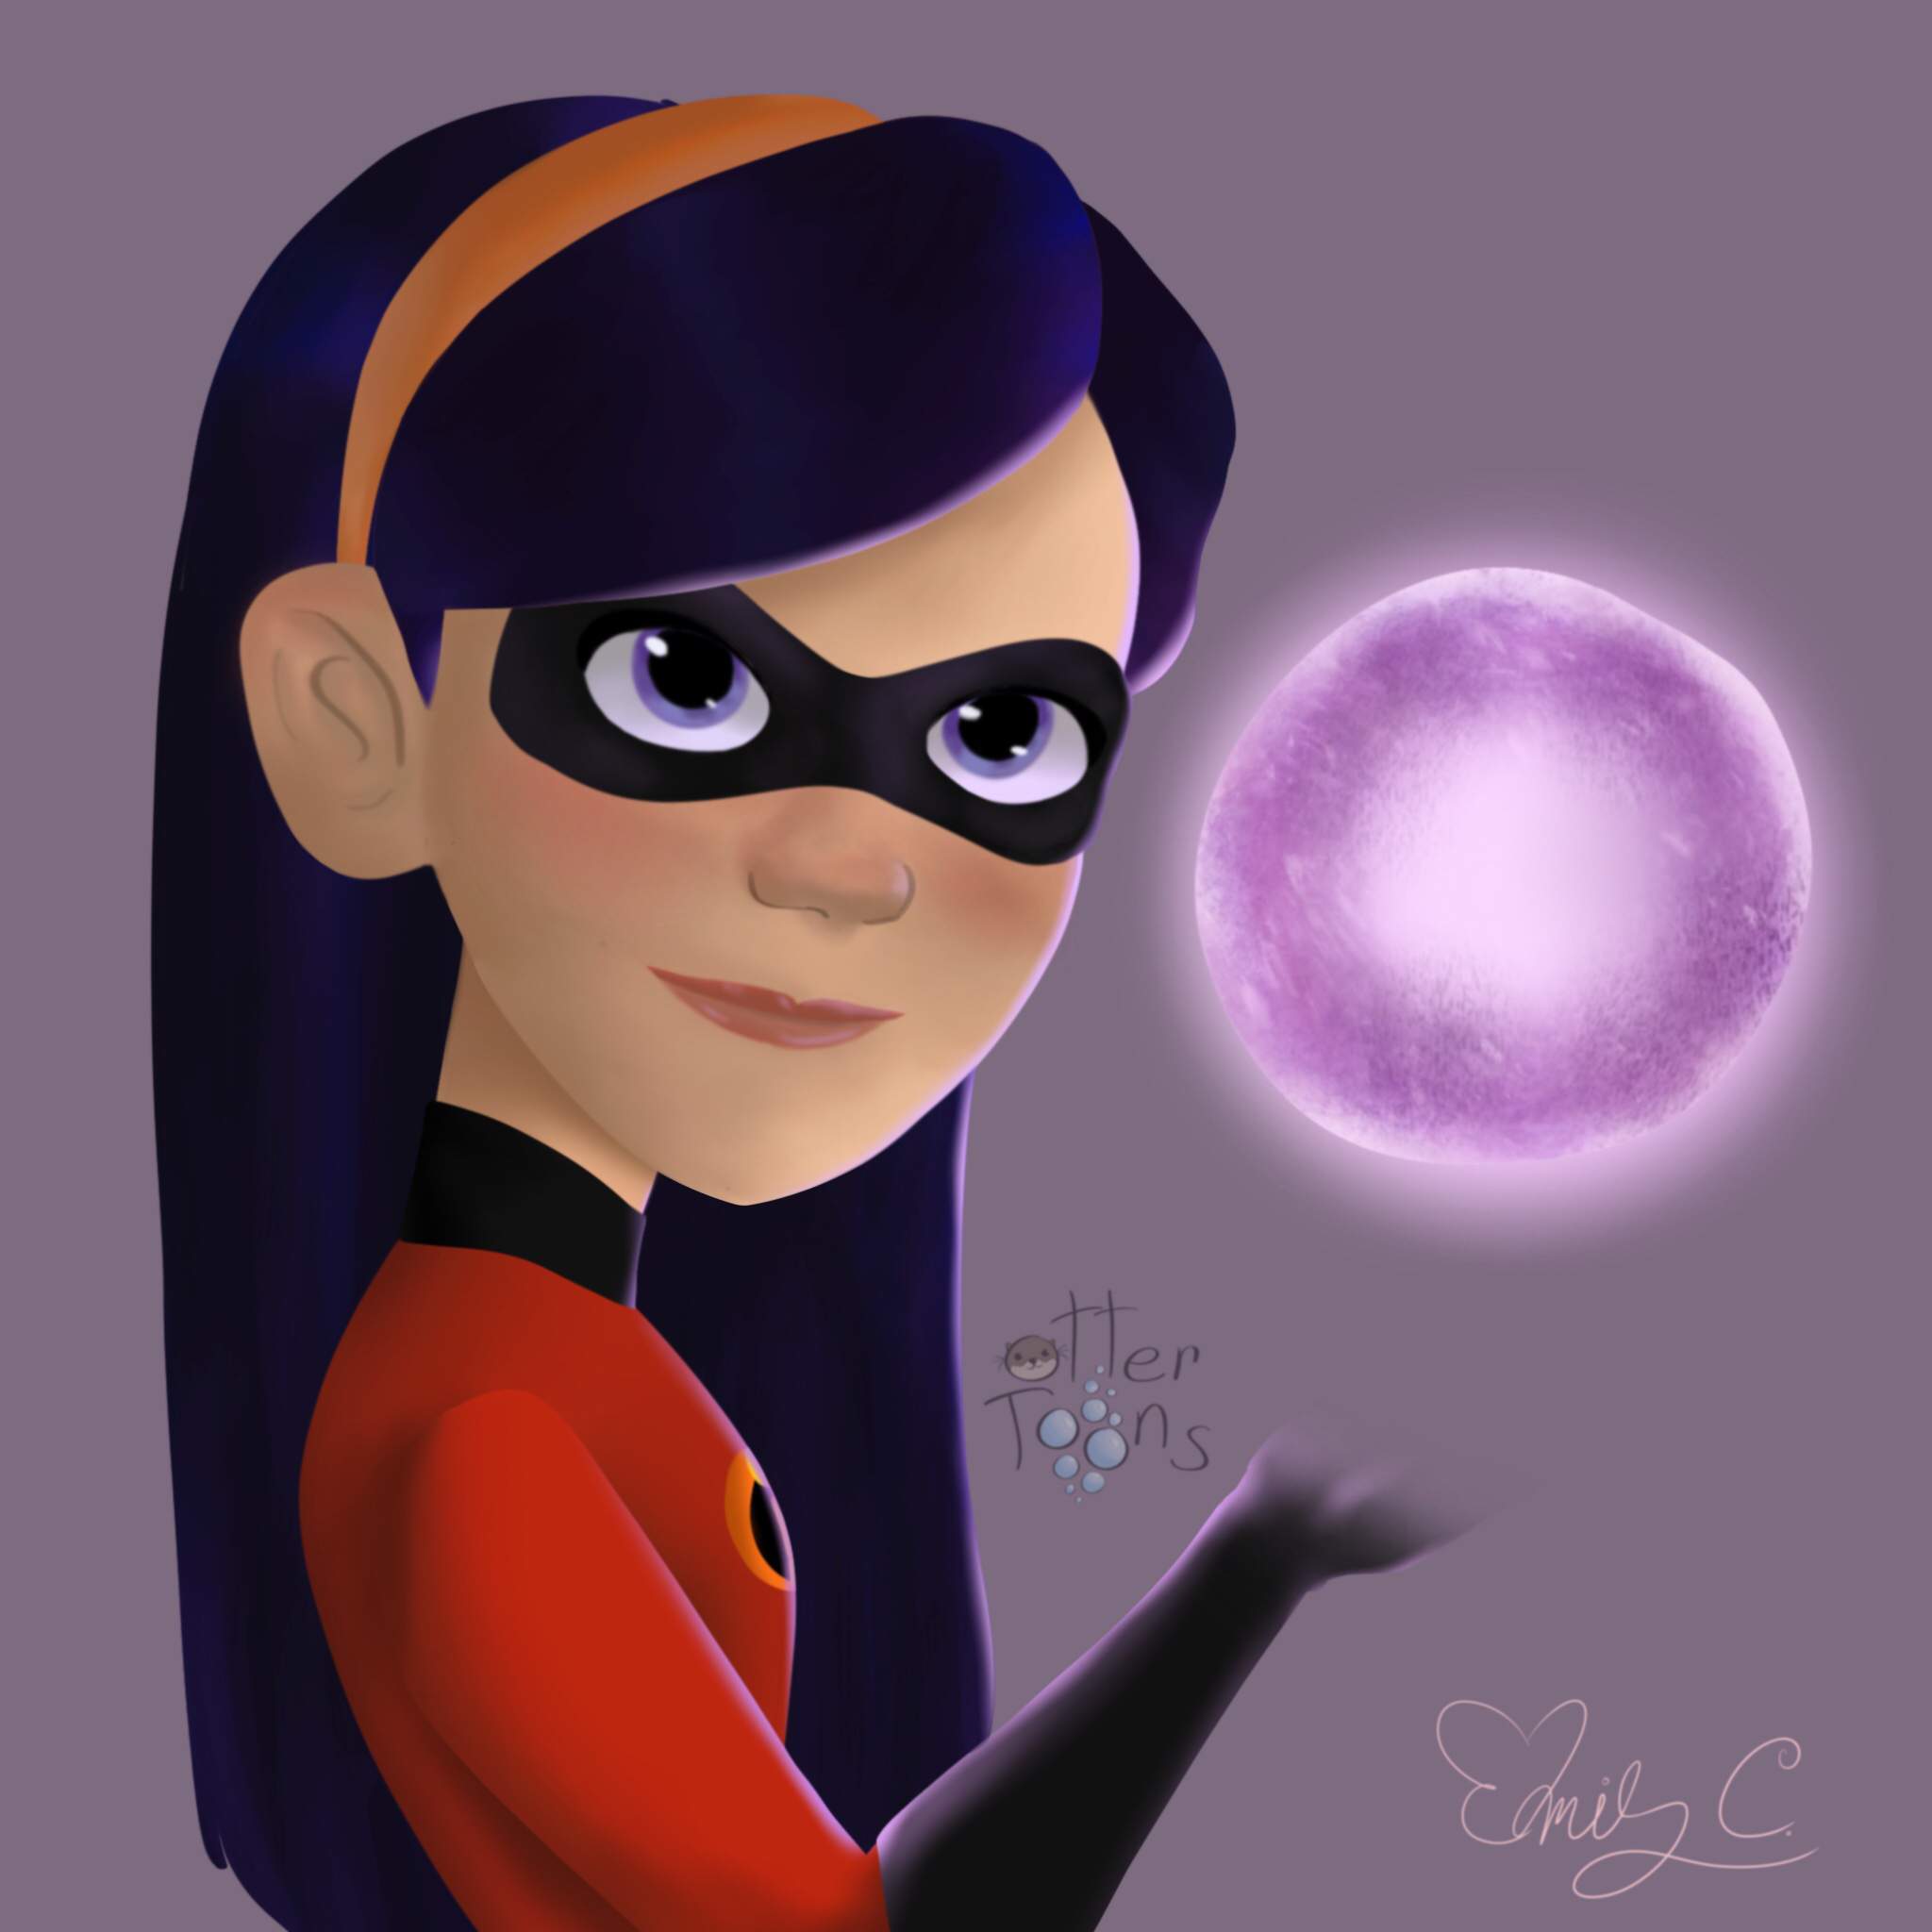 Violet Parr | The Incredibles Wiki | FANDOM powered by Wikia